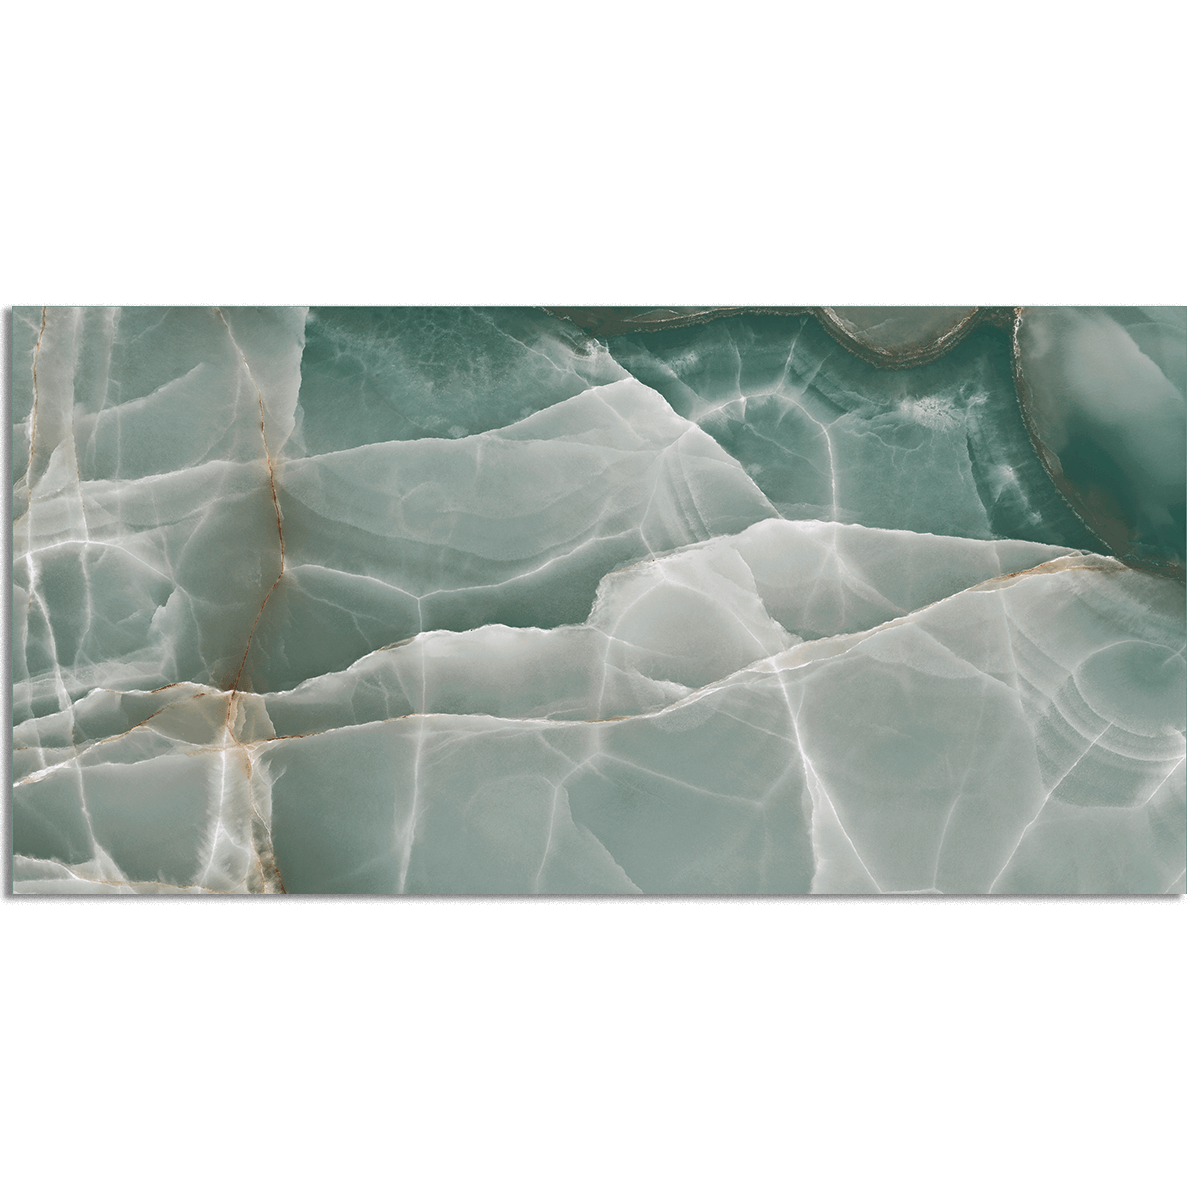 Onyx Large Emerald Polished Turquoise Green Marble Polished Wall And Floor Porcelain Tiles 60cmx120cm